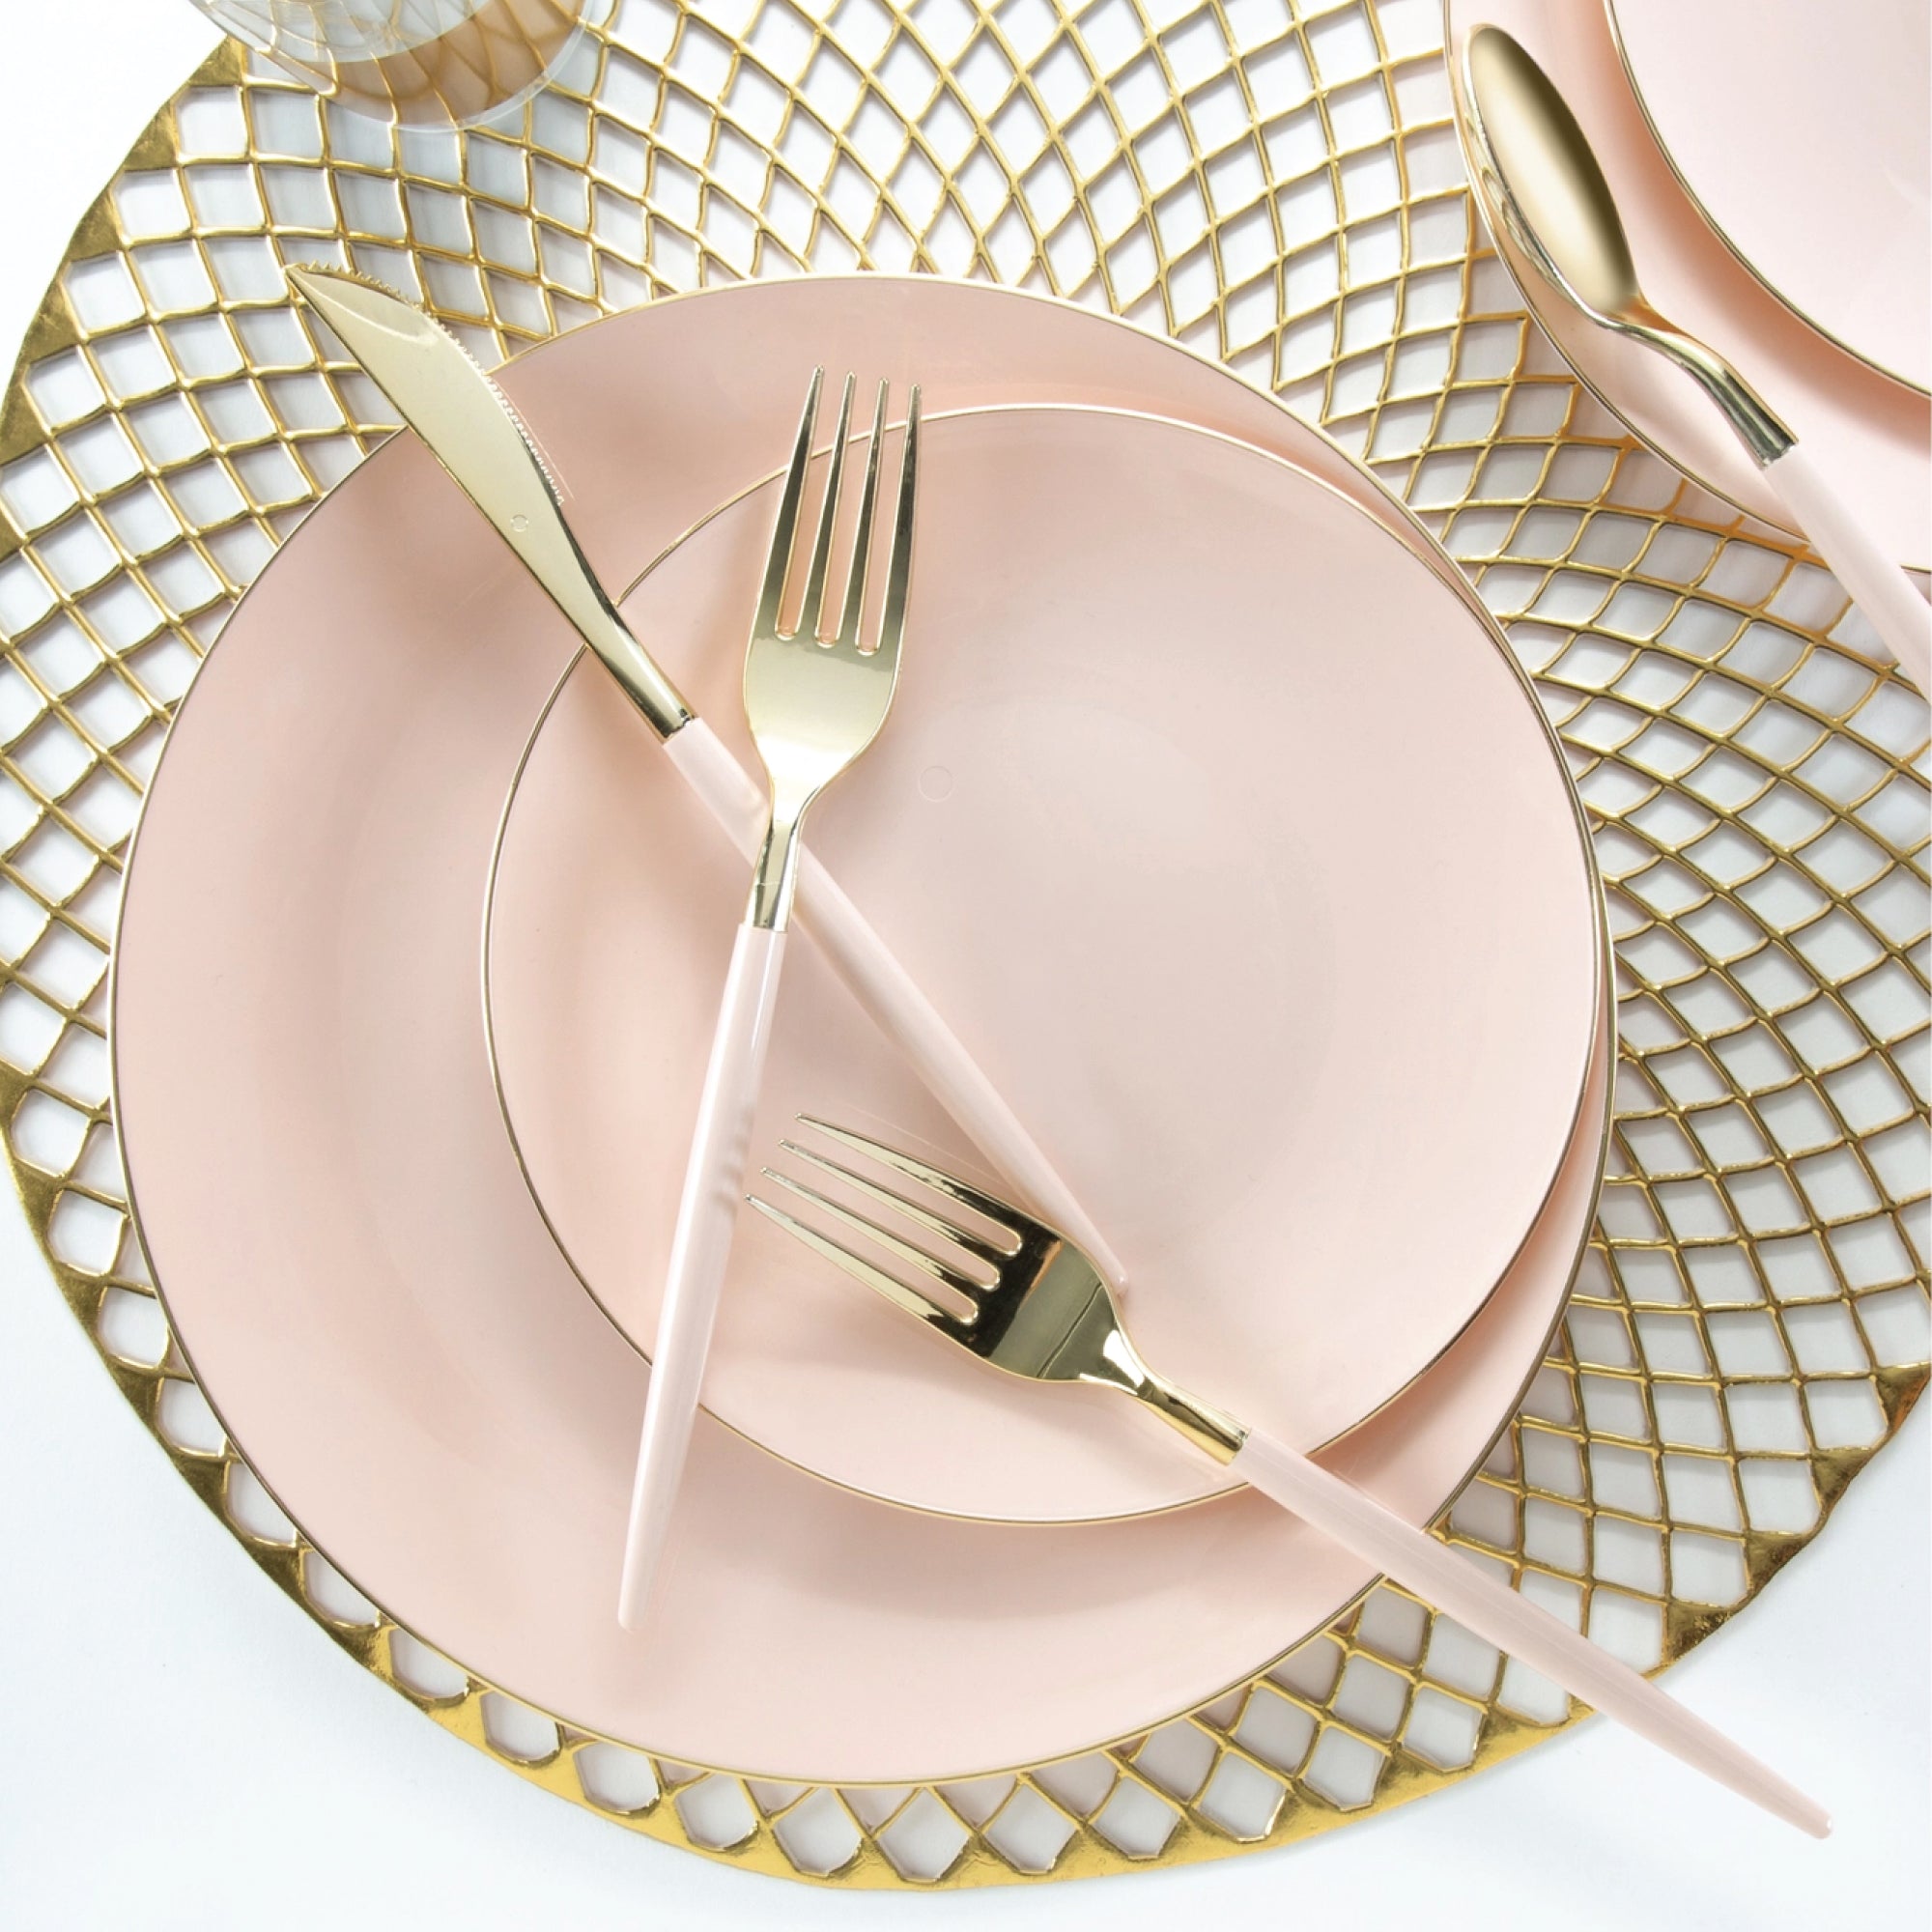 Blush Pink & Gold Plastic Cutlery Set for 8 | The Party Darling